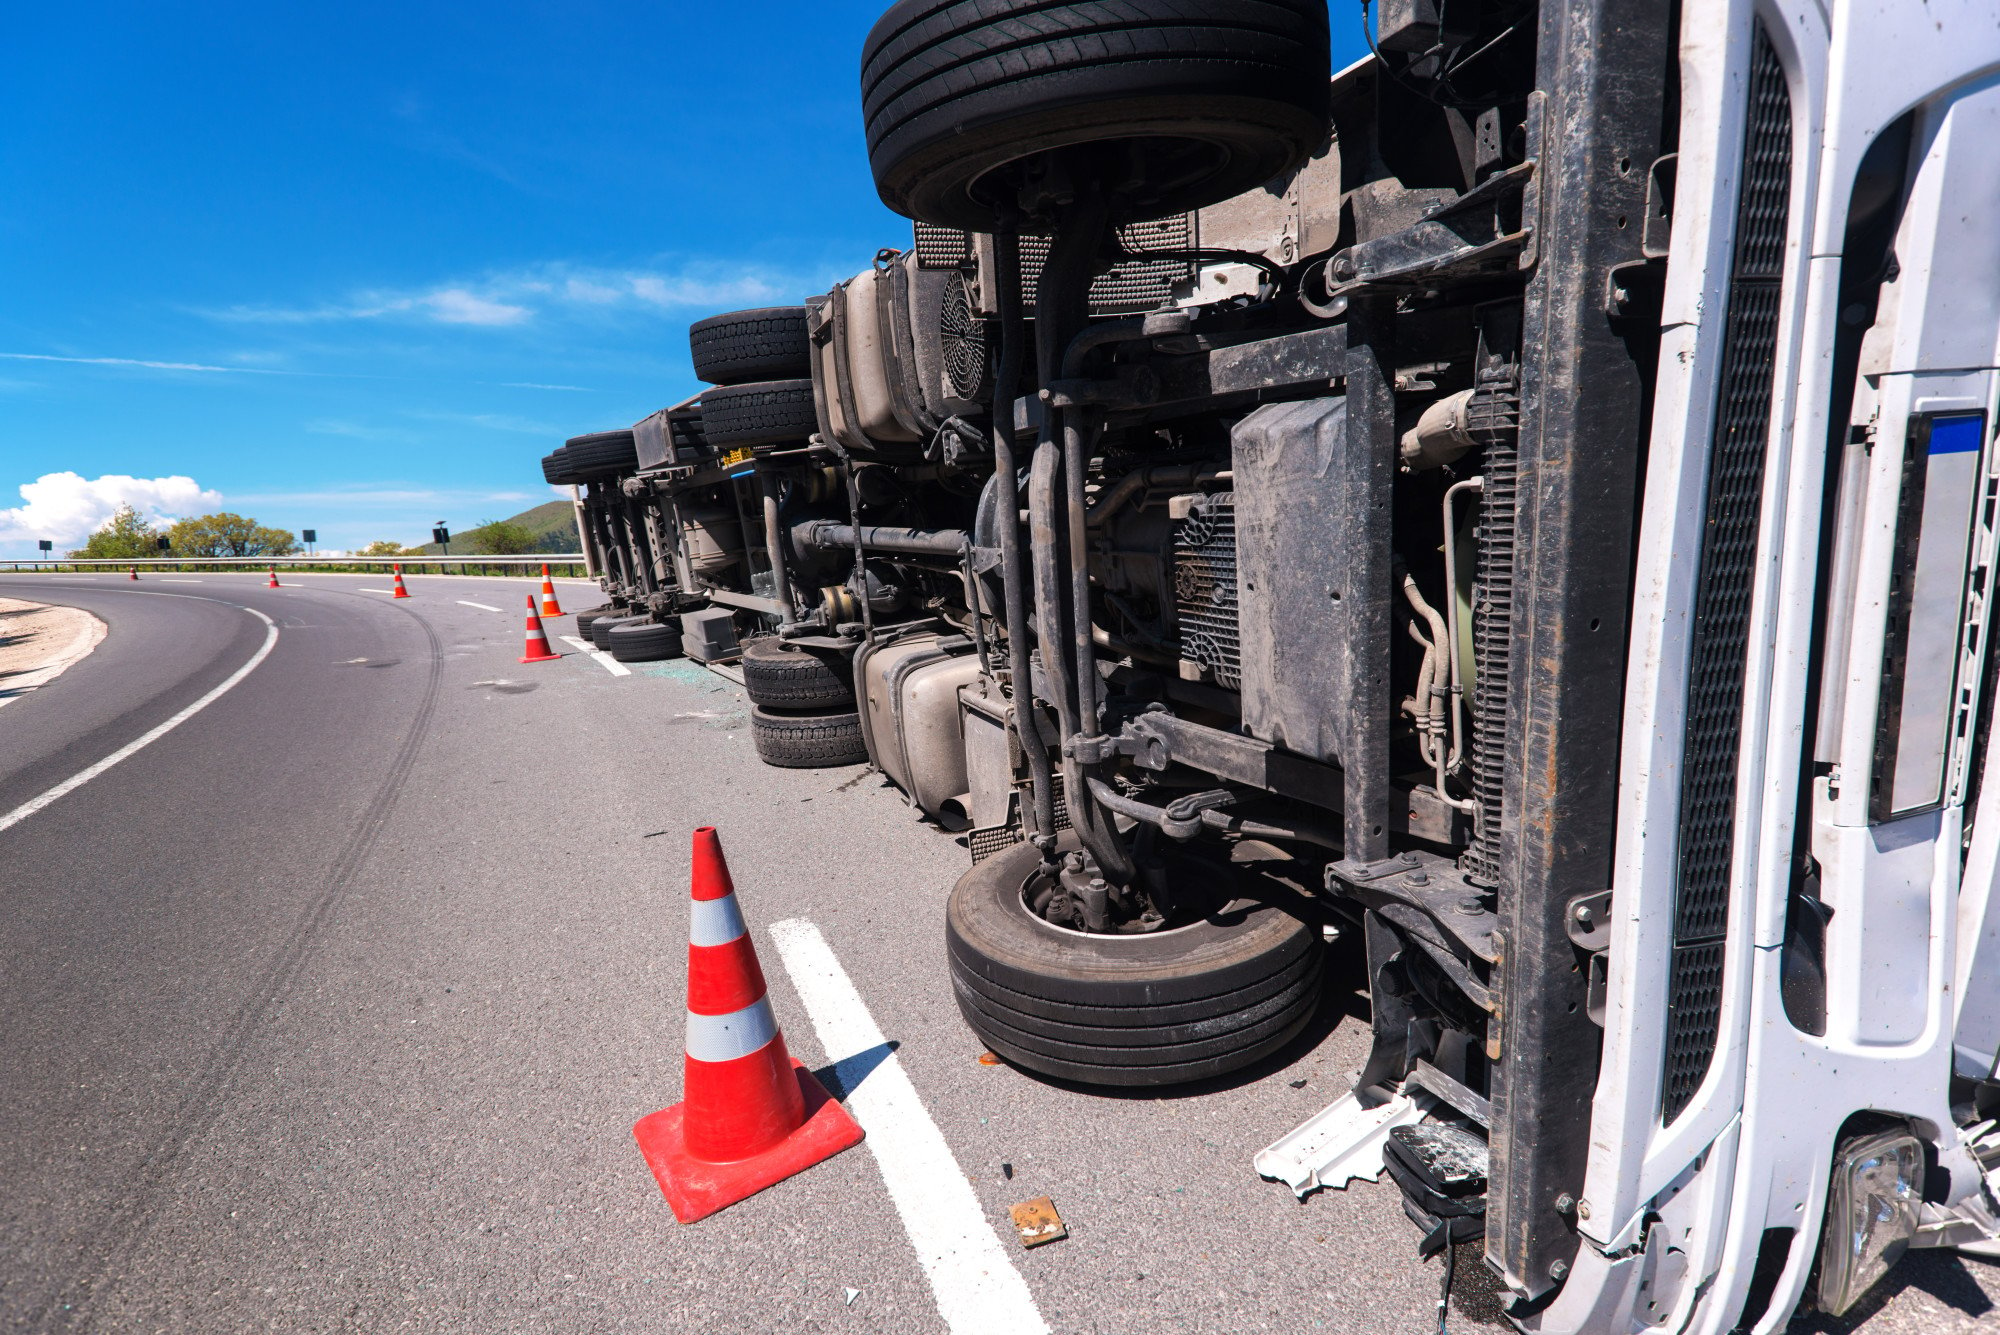 Explore key elements influencing commercial truck accident settlements. From liability to damages, uncover the factors shaping fair resolutions. Learn more now!